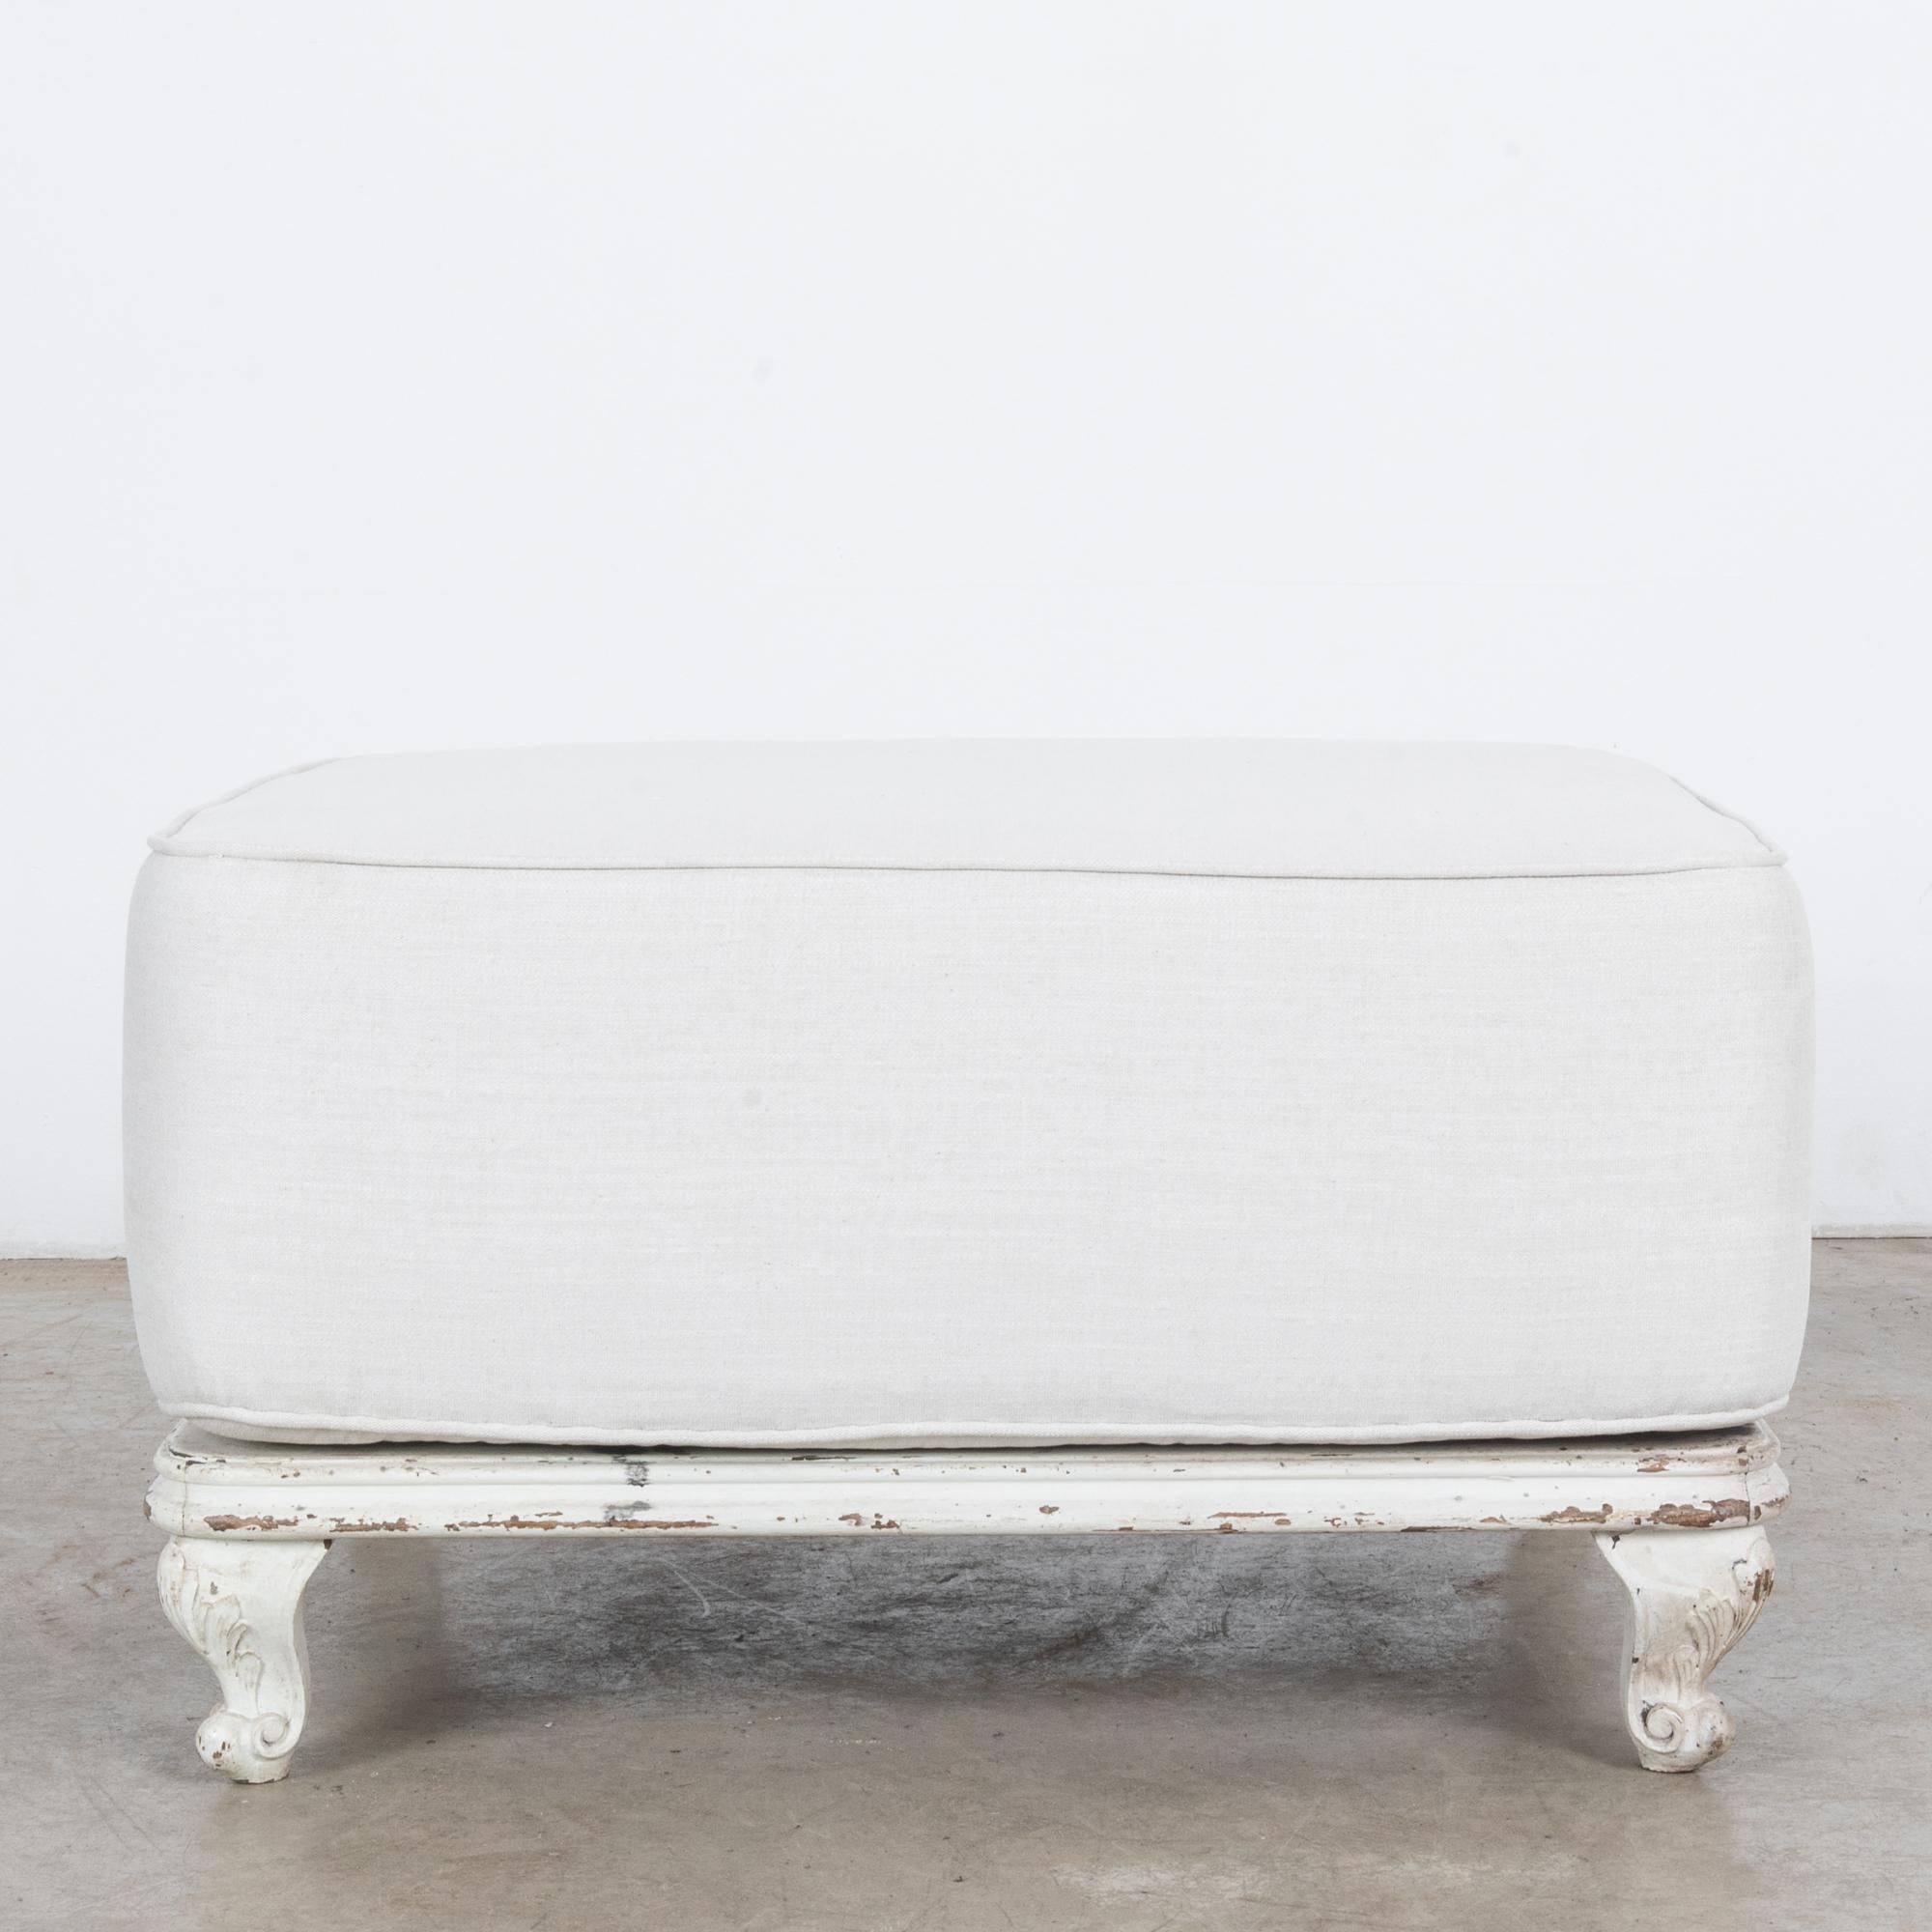 This ottoman was made in Scandinavia, circa 1900. The upholstered, well-padded seat rests on a weathered wooden base painted white. Intricate foliate carvings on the cabriole legs add charm to this homely and stylish couch.